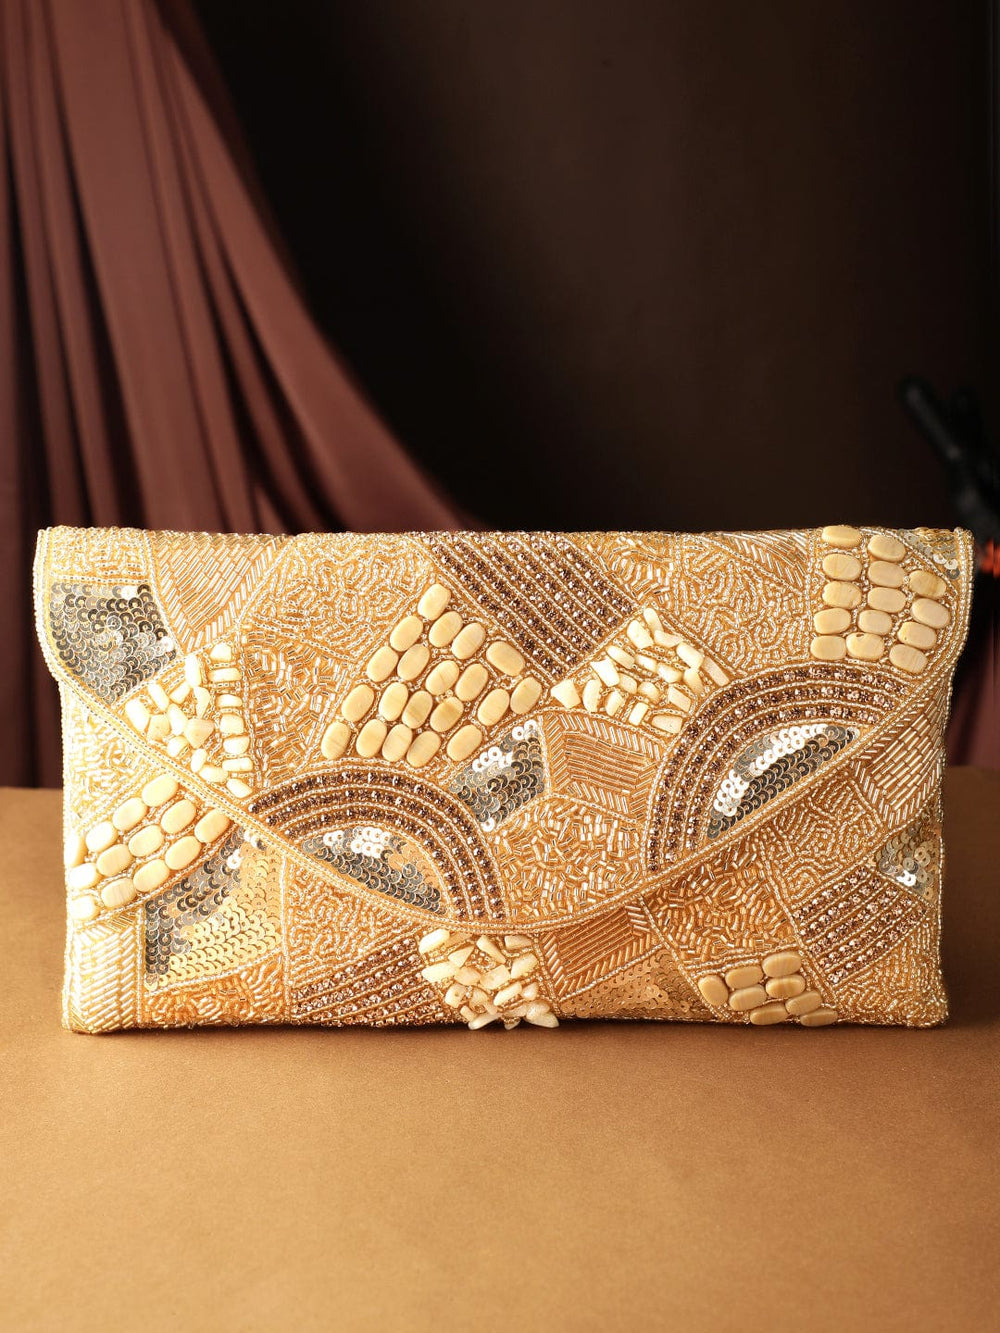 Rubans Golden Glamour Handcrafted Crystal Beaded Clutch with Gold Tone Embellishments Handbag, Wallet Accessories & Clutches